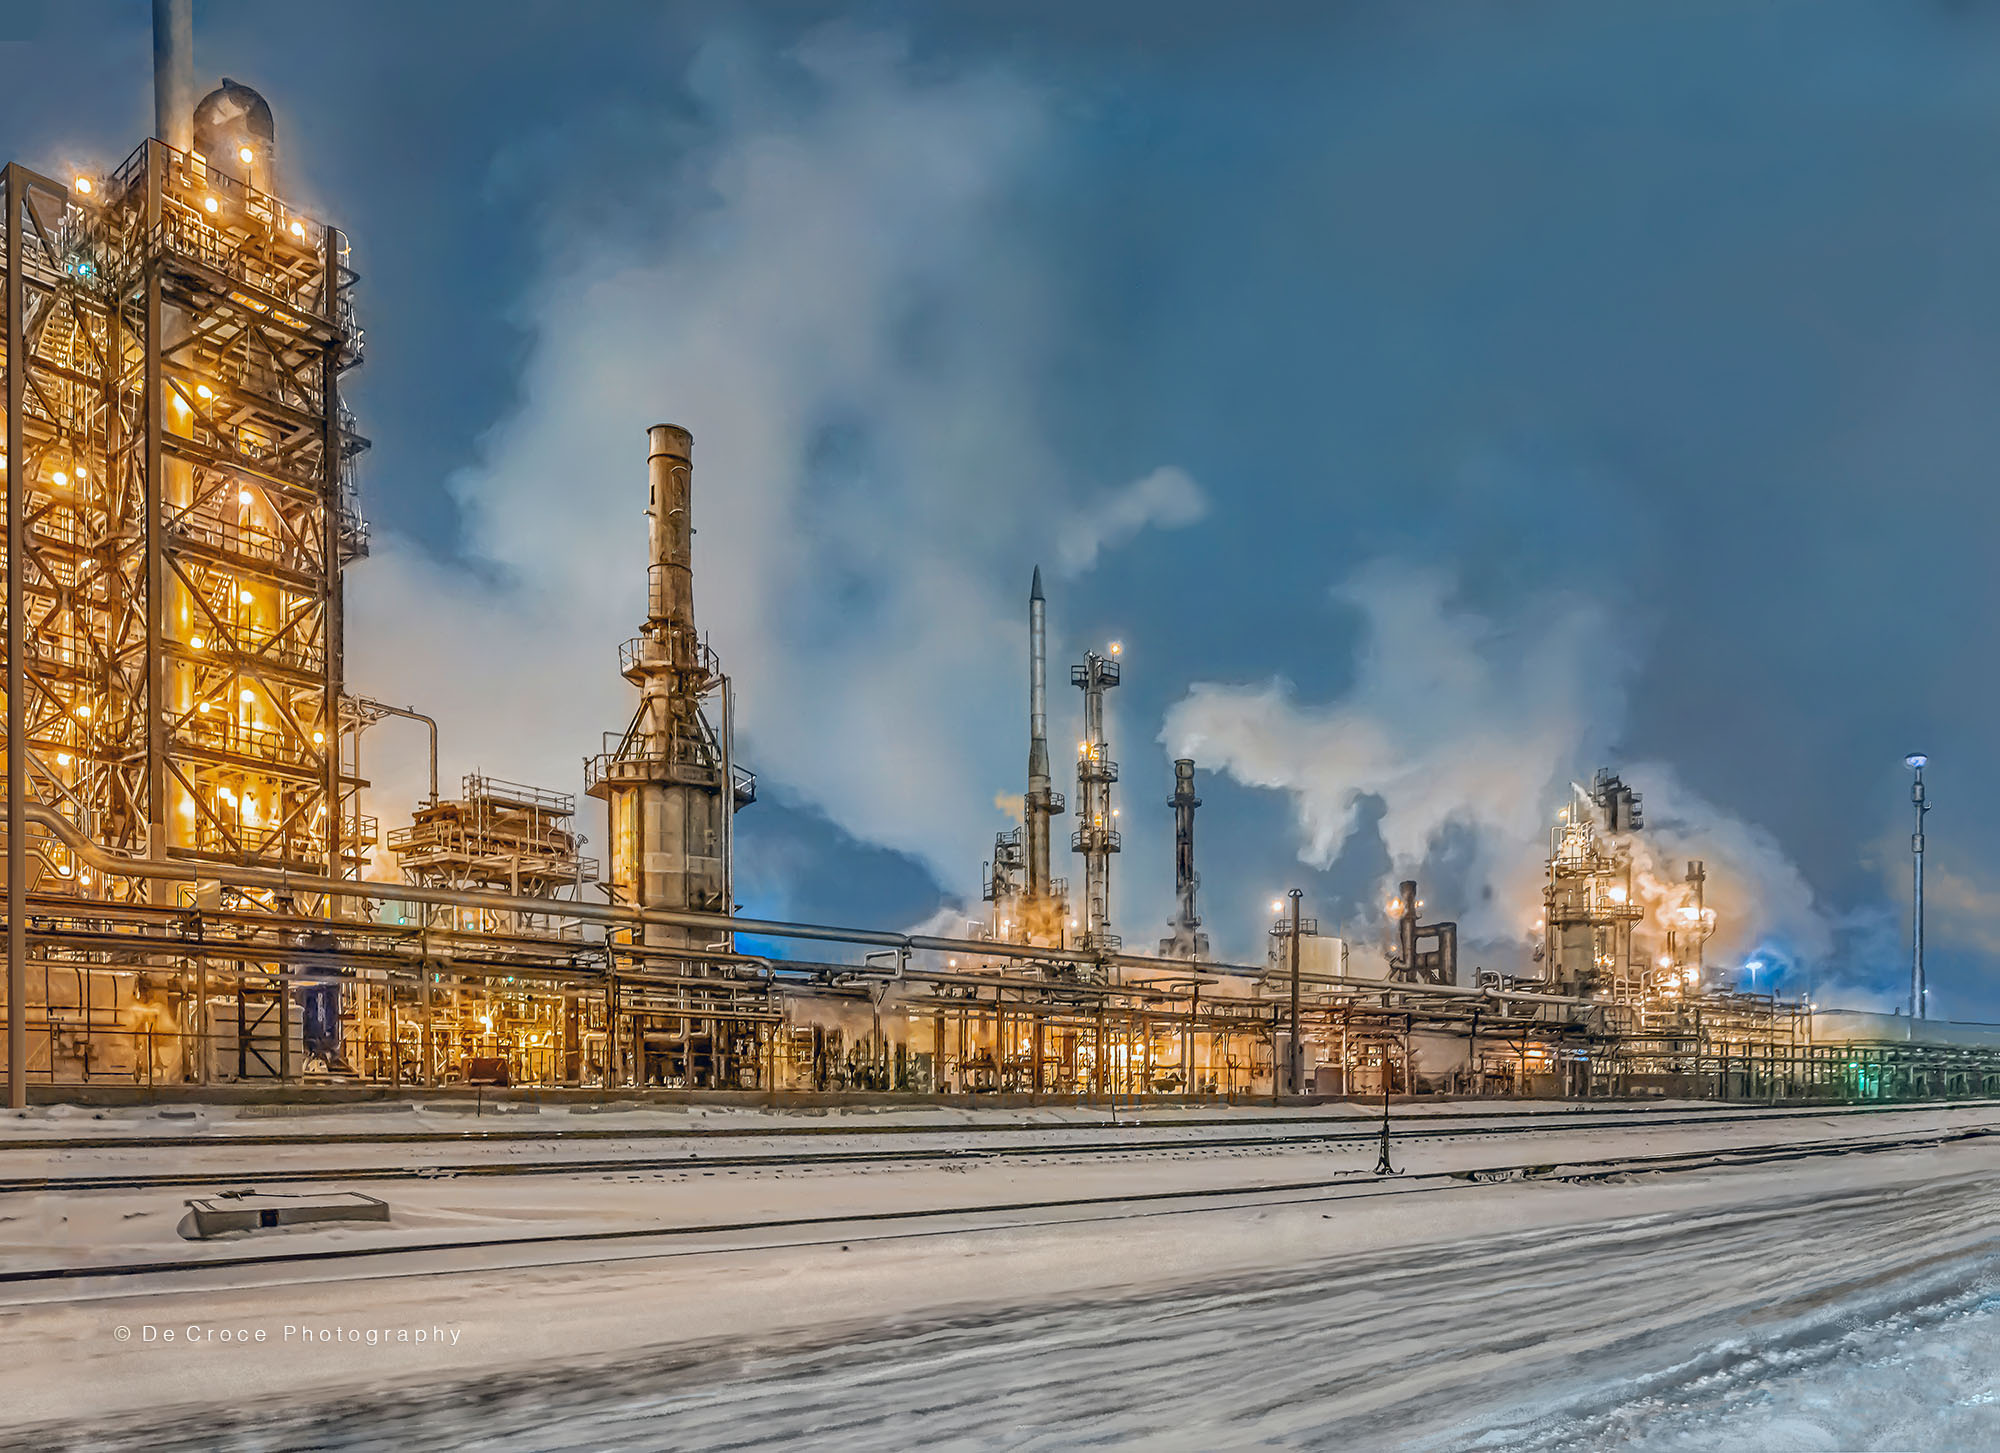 Denver industrial photography night shot depicting oil refinery in mid winter